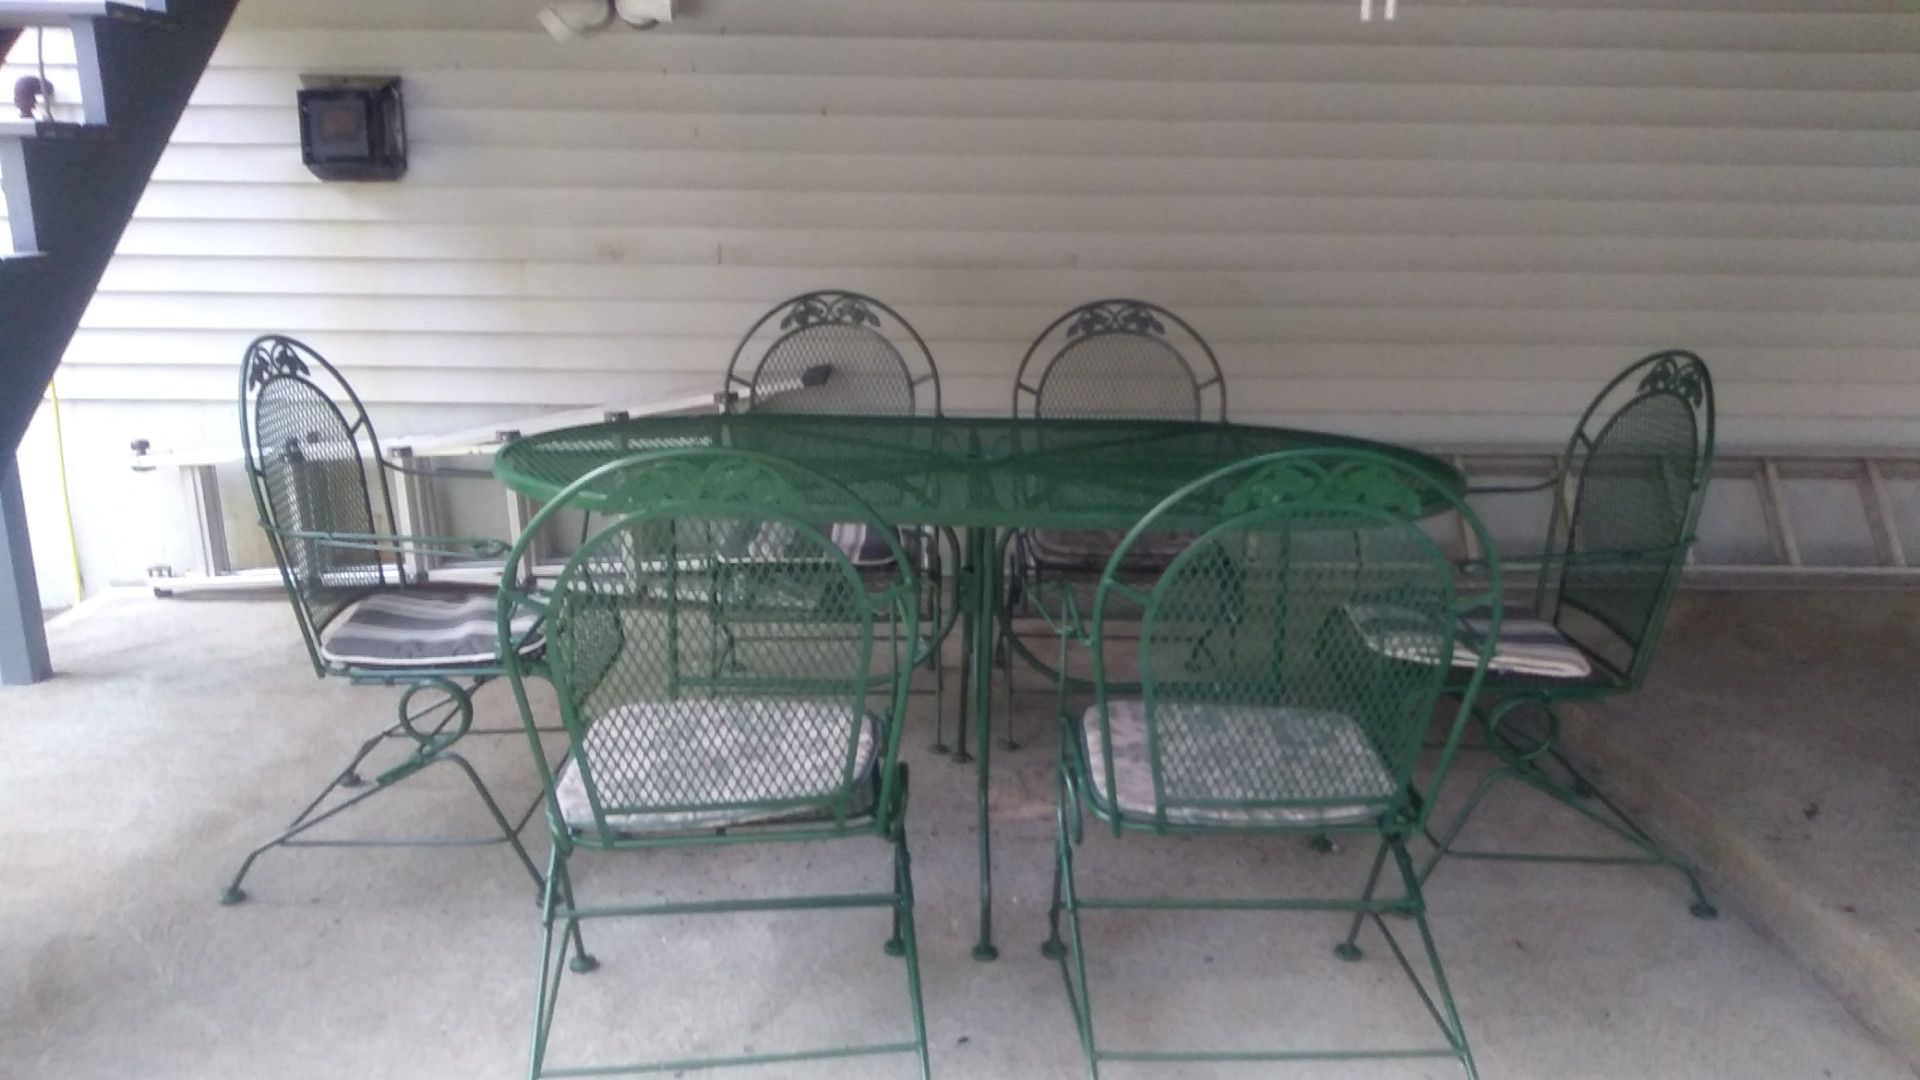 Patio table with 6 chairs comes with new umbrella